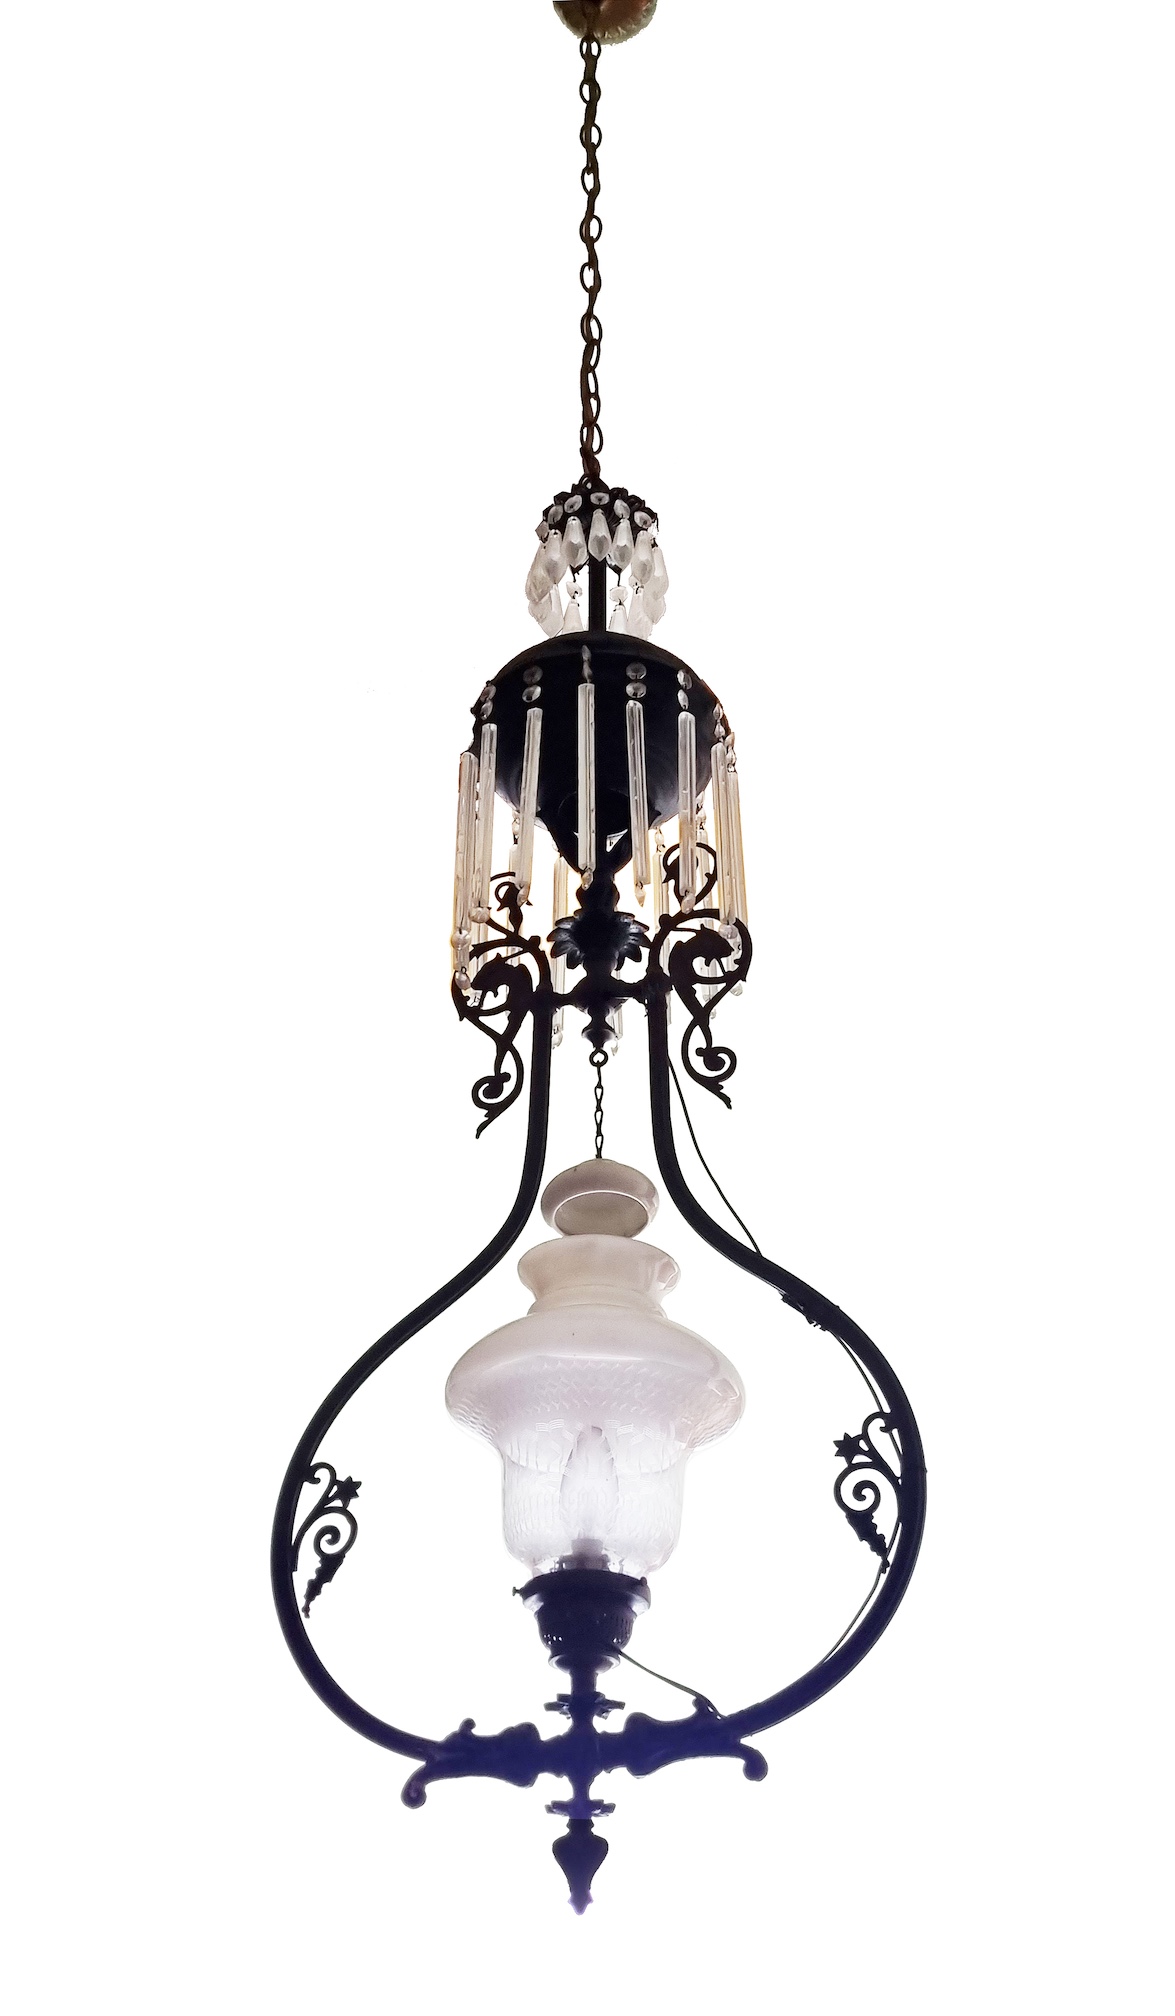 A 19th century antique European hanging oil lamp with white glass shade (modified as electric lamp).